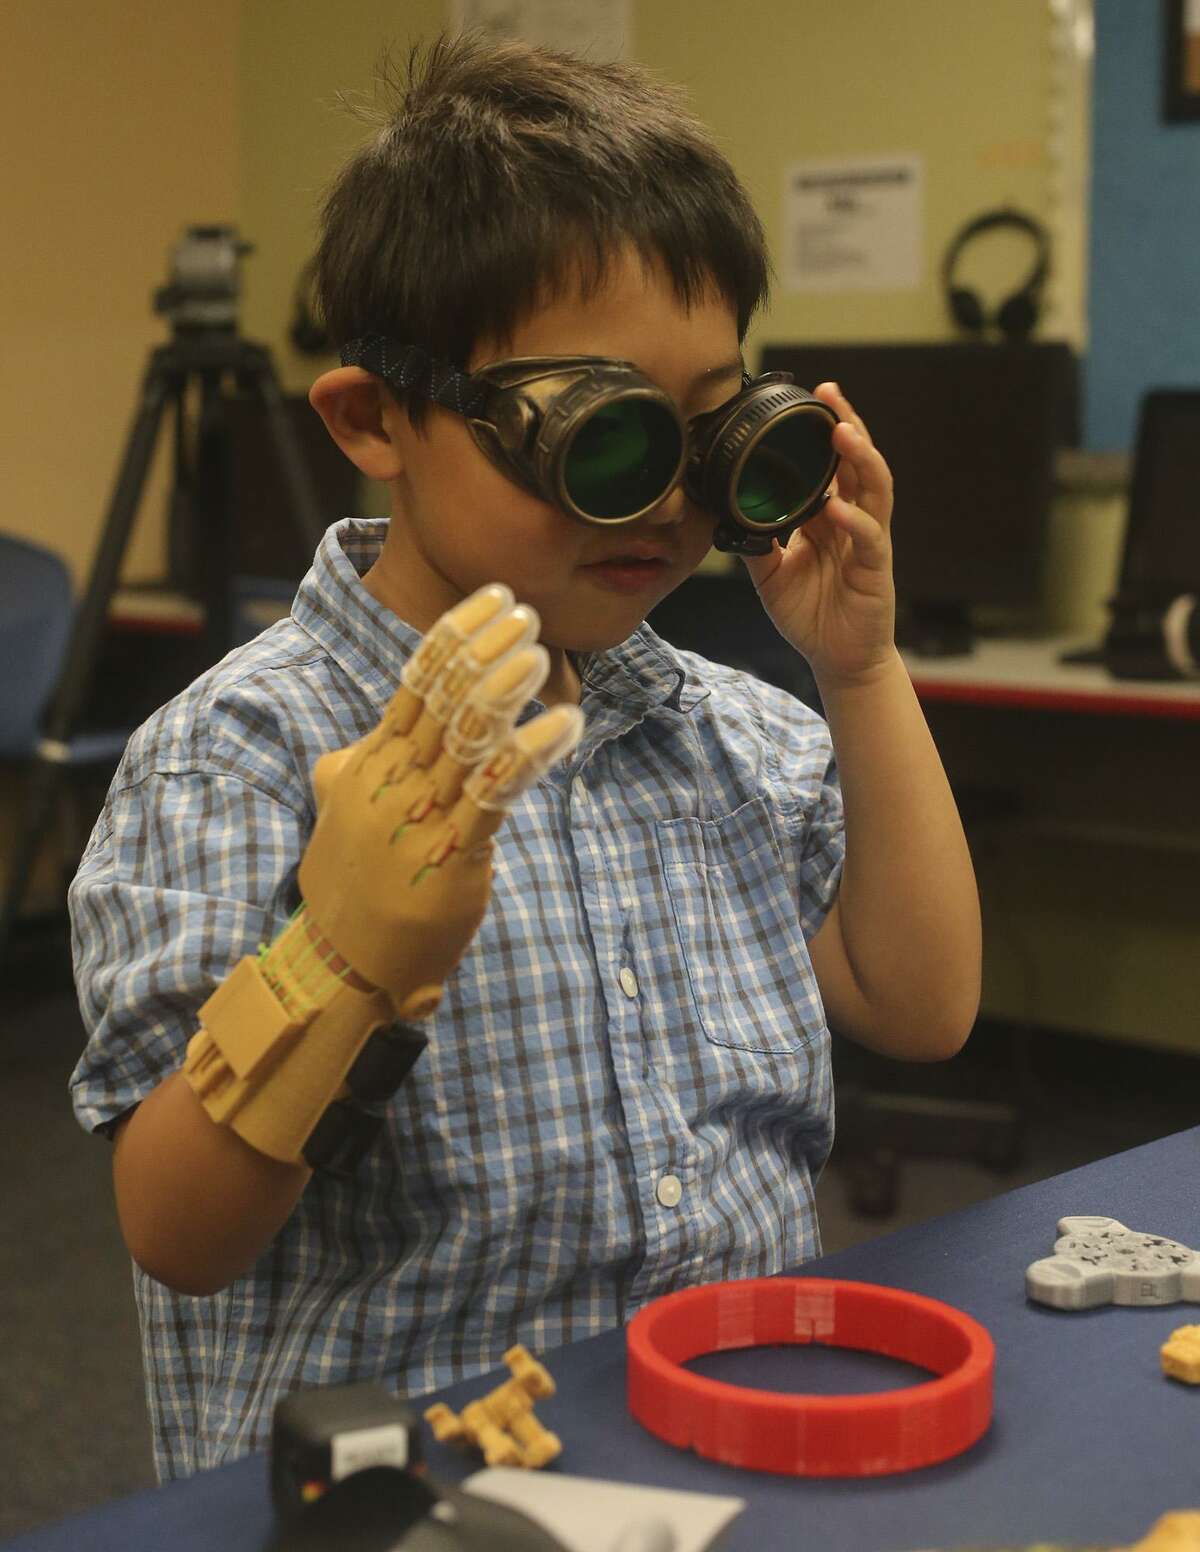 Zack Robbins,6, uses a prosthetic hand Wednesday March 8, 2017 made with a 3D printer by School of Science and Technology student Justin Cantu,16. Robbins was born with underdeveloped right hand and Cantu used technology created by an on-line community called e-NABLE to make the hand for Robbins.